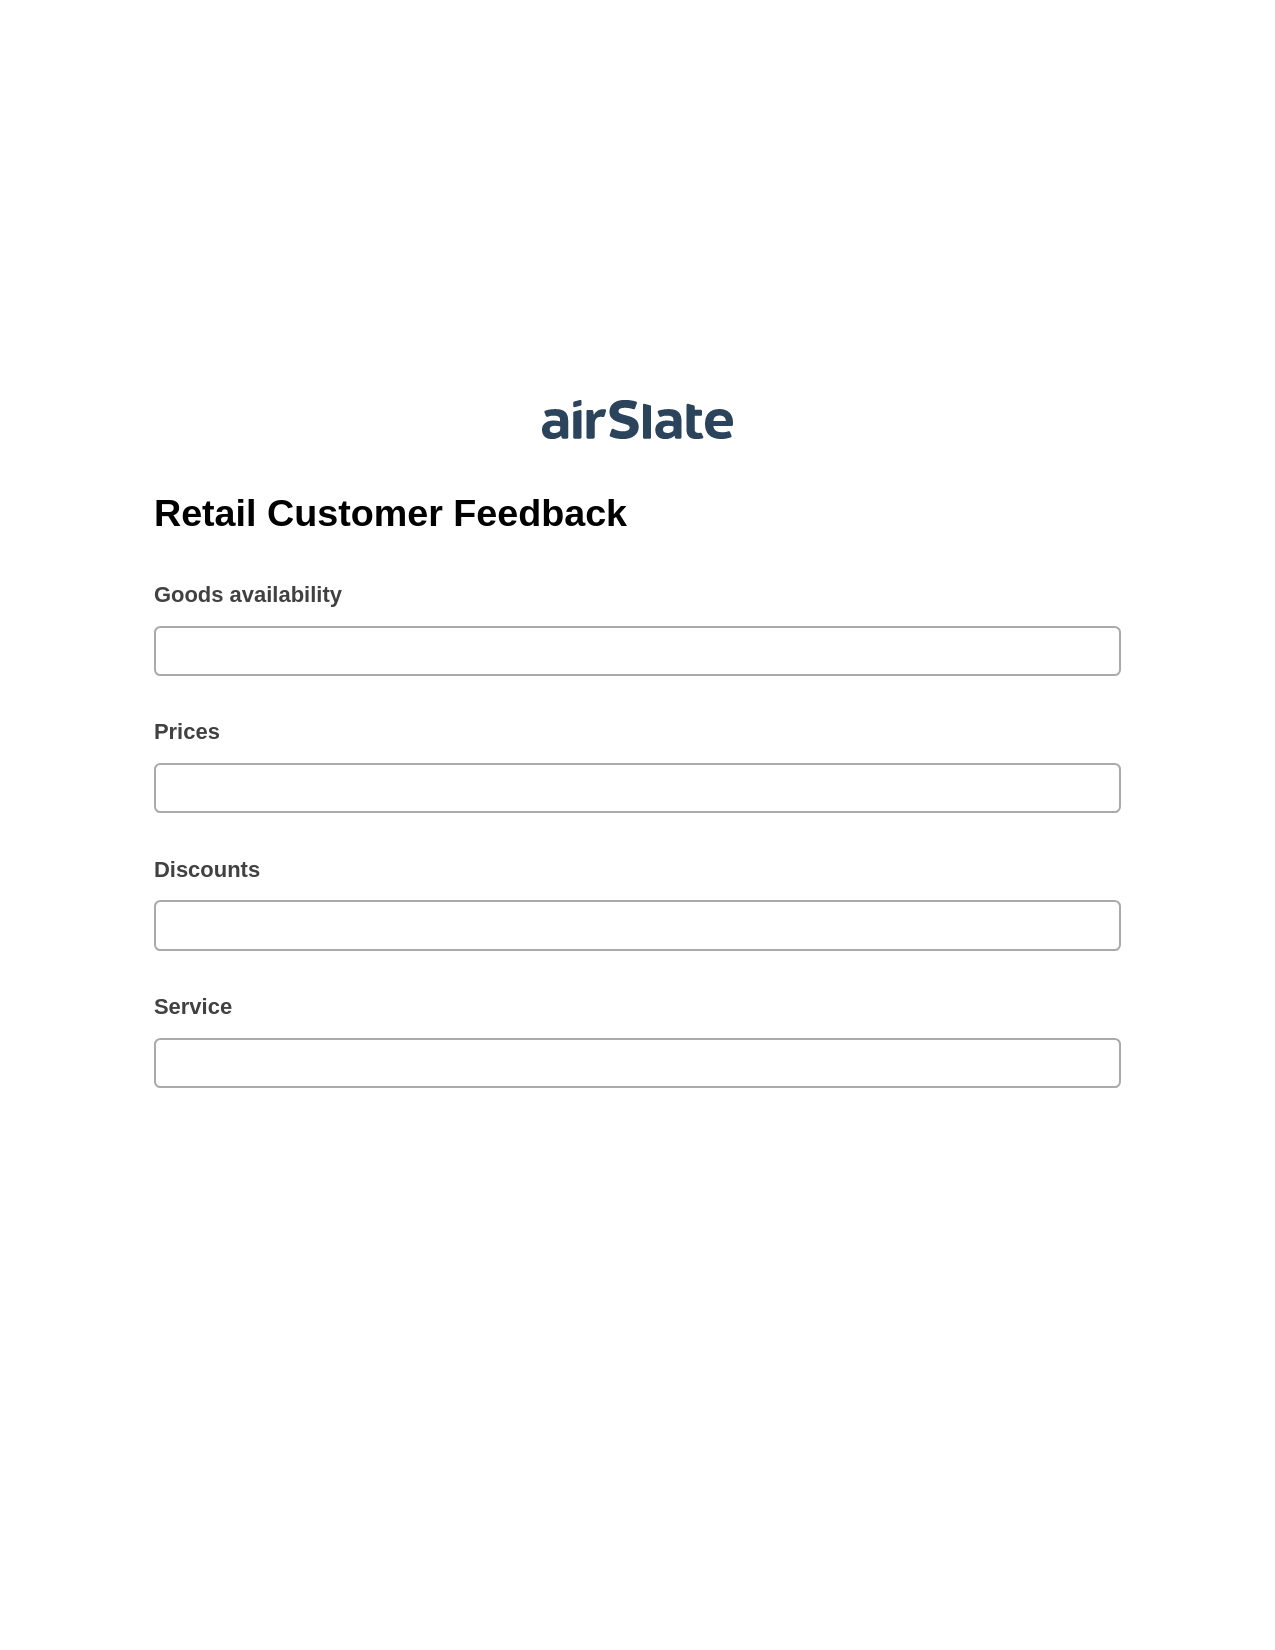 Multirole Retail Customer Feedback Pre-fill Slate from MS Dynamics 365 Records Bot, Reminder Bot, Export to Smartsheet